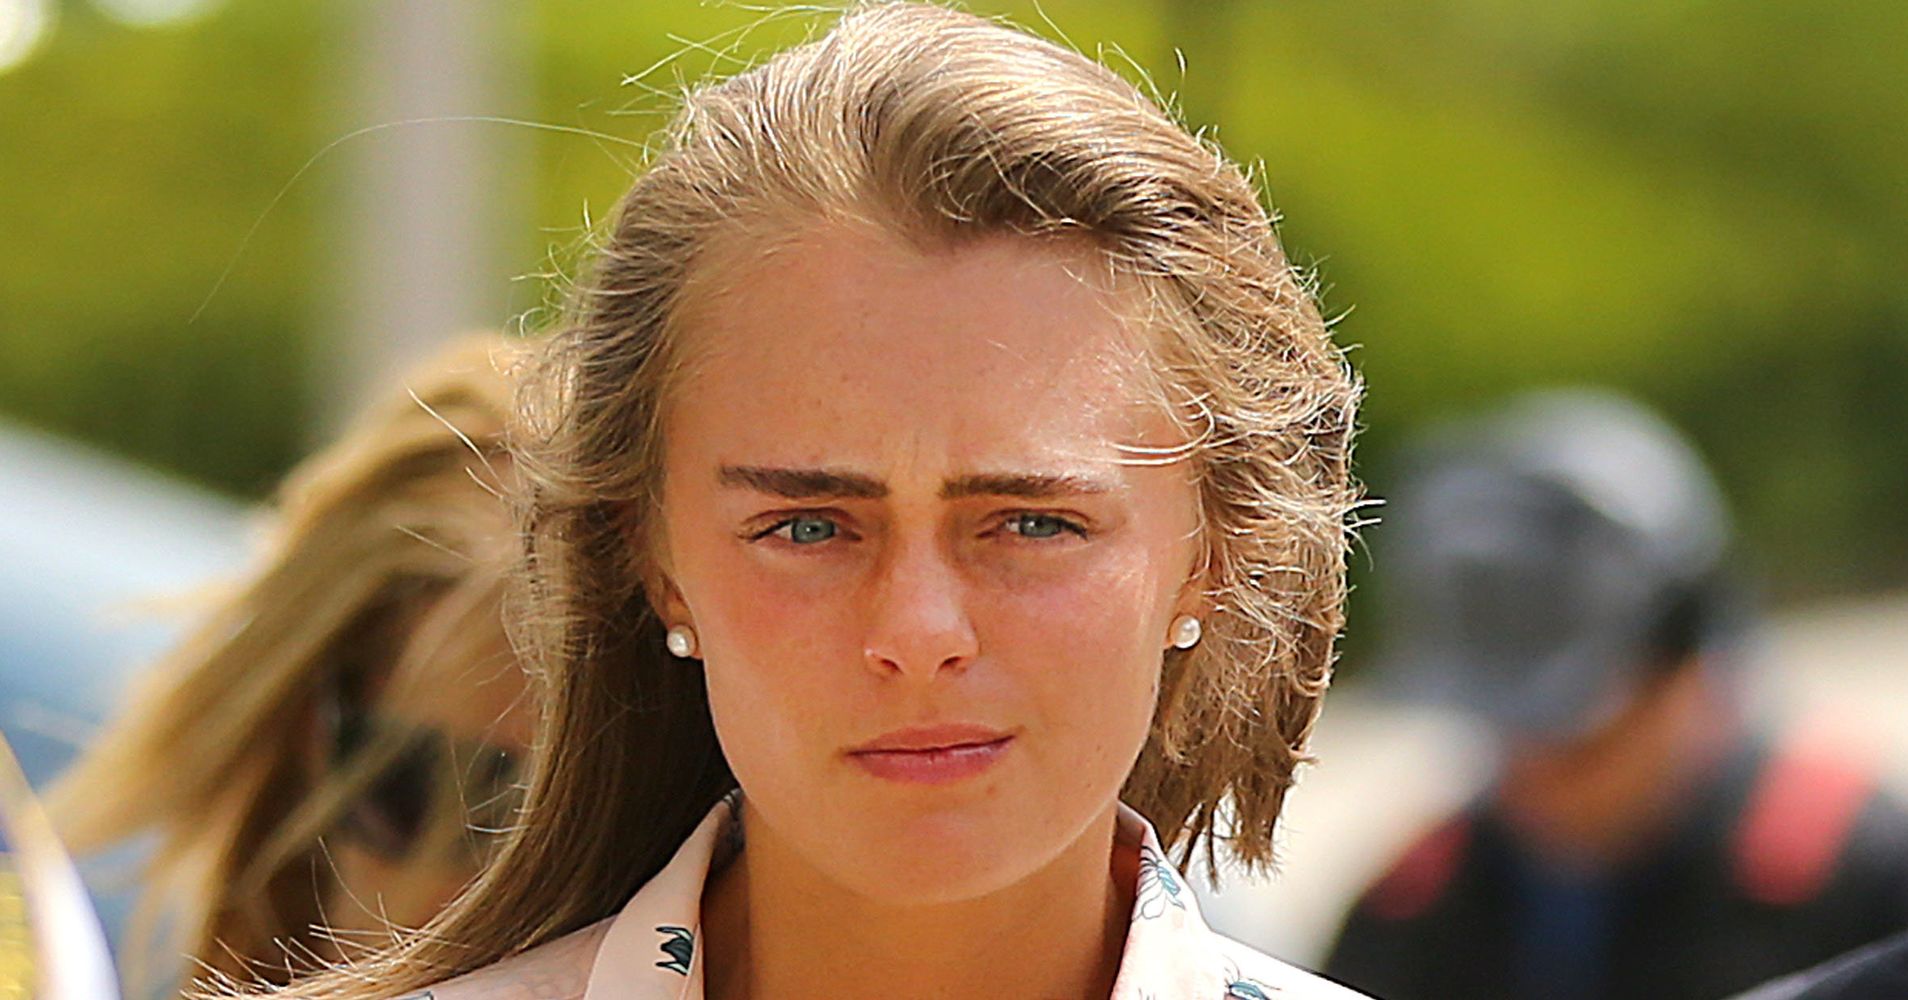 Michelle Carter Hit With $4.2 Million Wrongful Death Suit From Ex